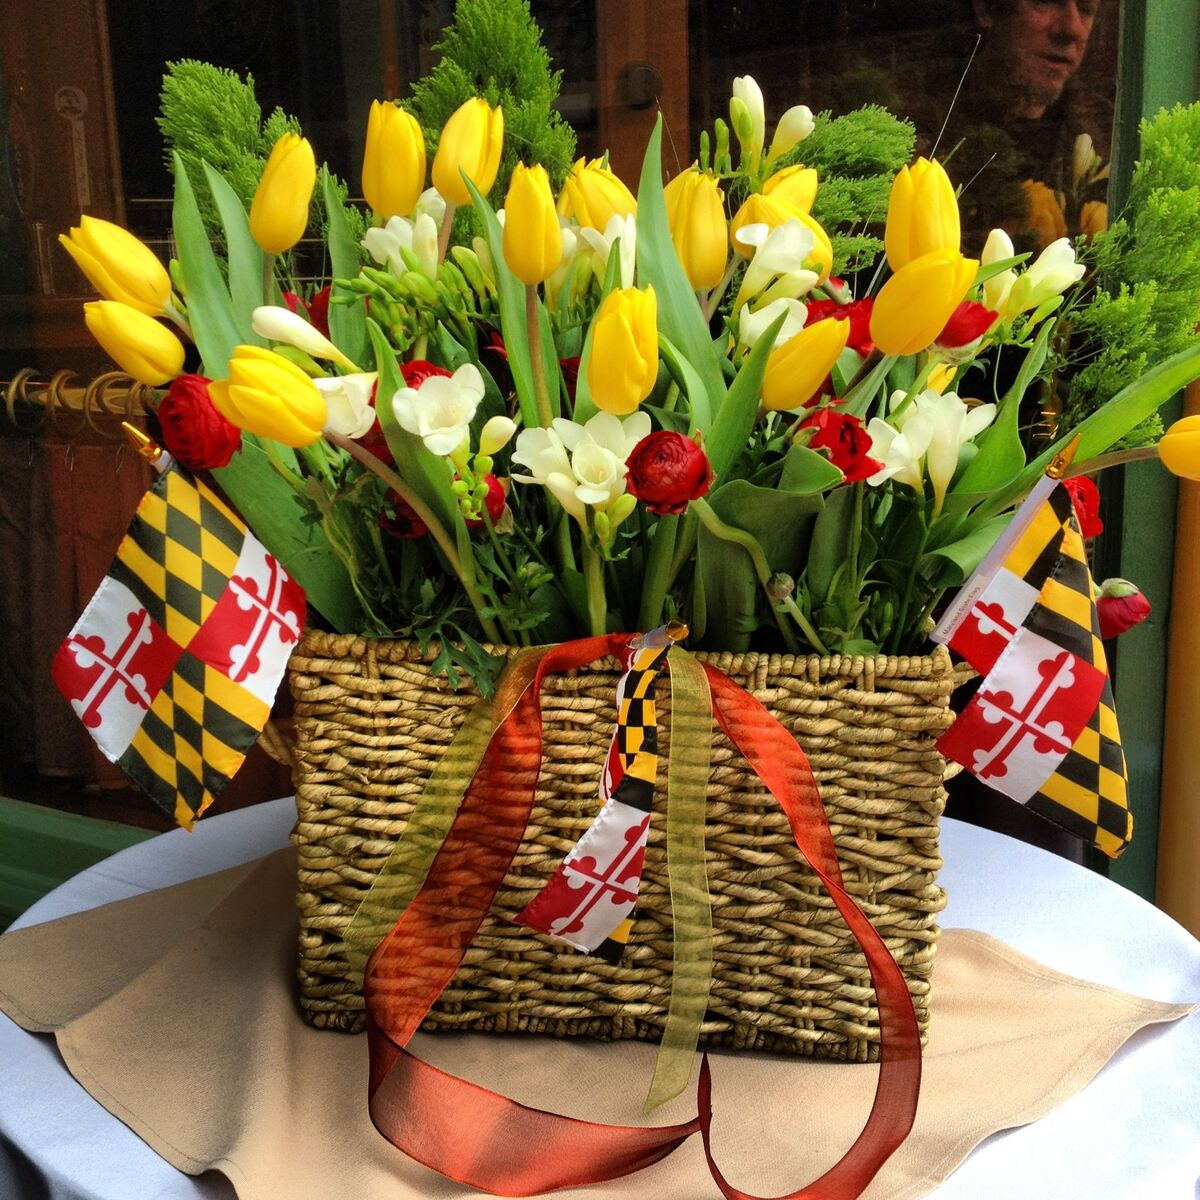 What Is The Purpose Of May Day Baskets?